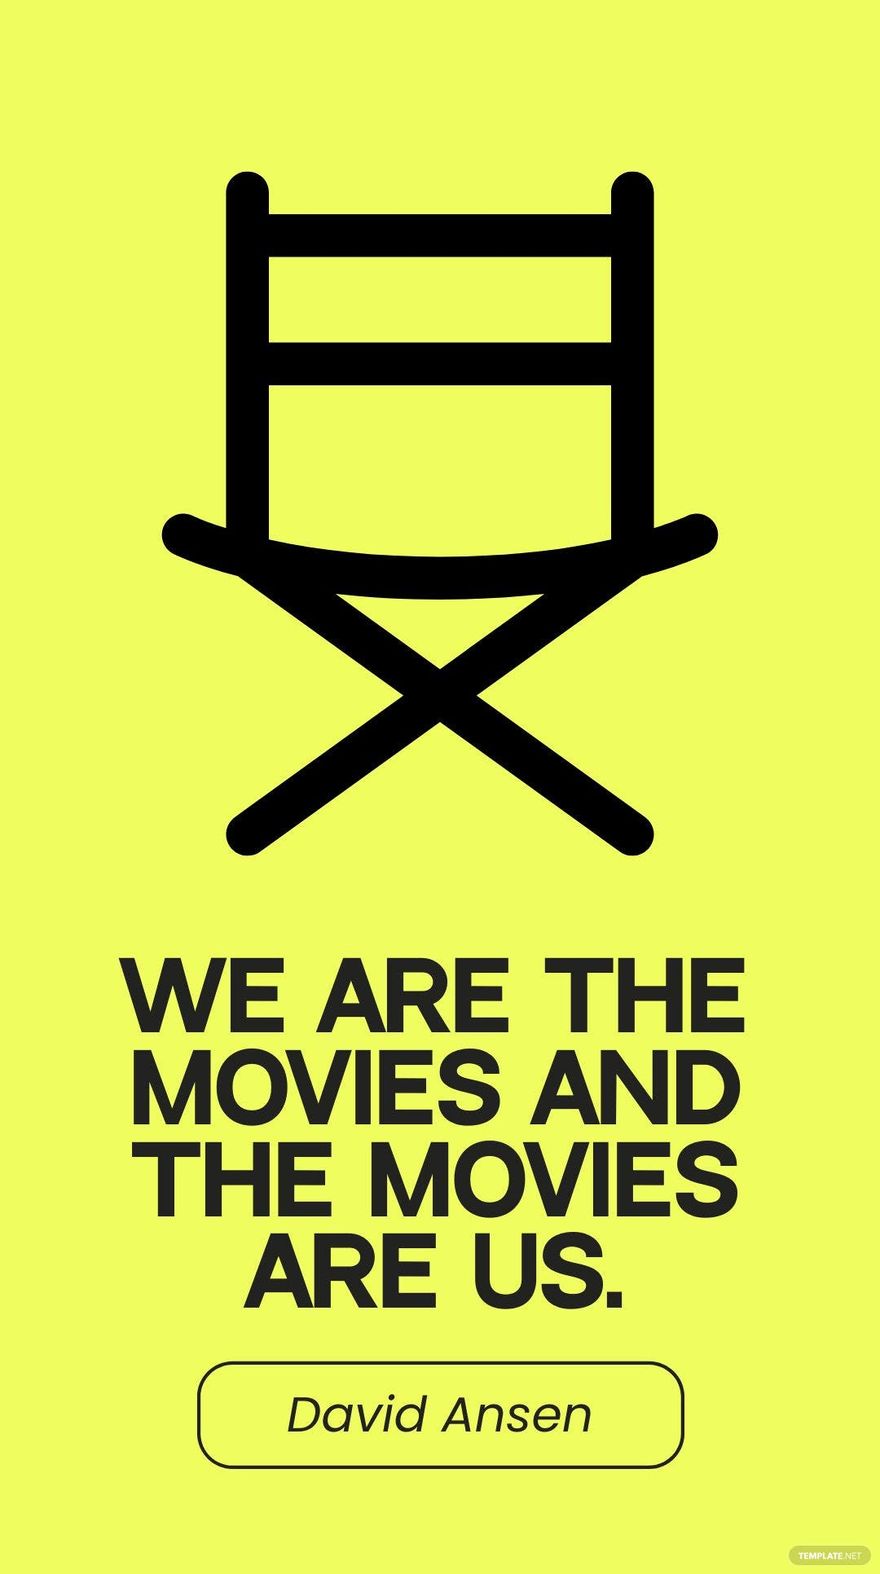 Free David Ansen - We are the movies and the movies are us. in JPG